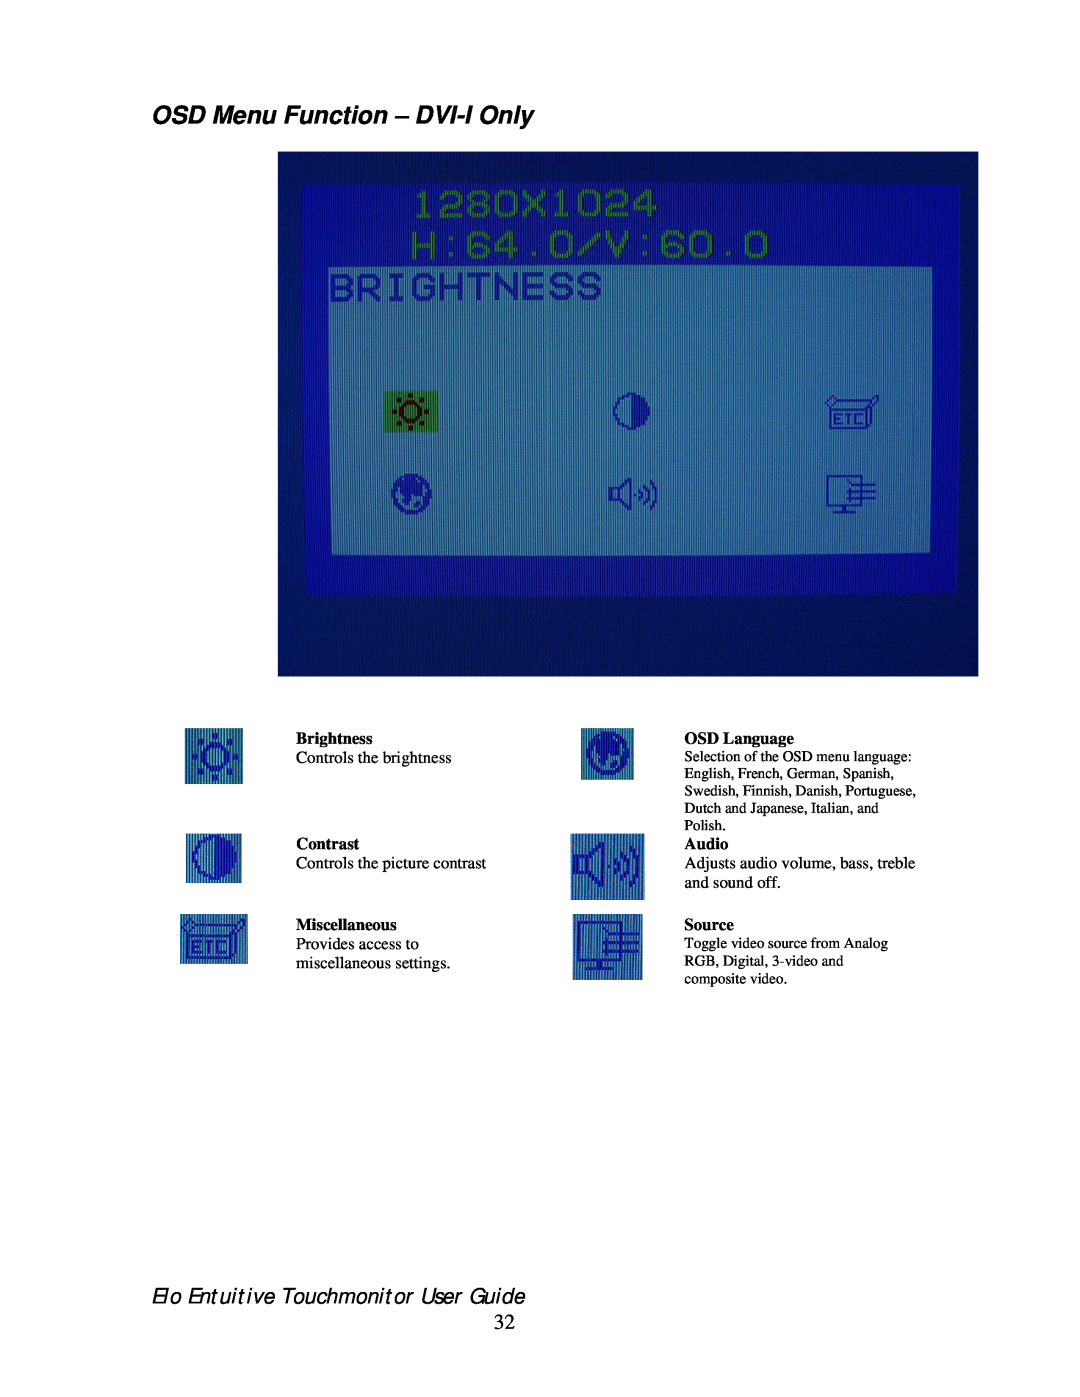 Elo TouchSystems 192XL-XXWA-1 Series OSD Menu Function - DVI-I Only, Elo Entuitive Touchmonitor User Guide, and sound off 